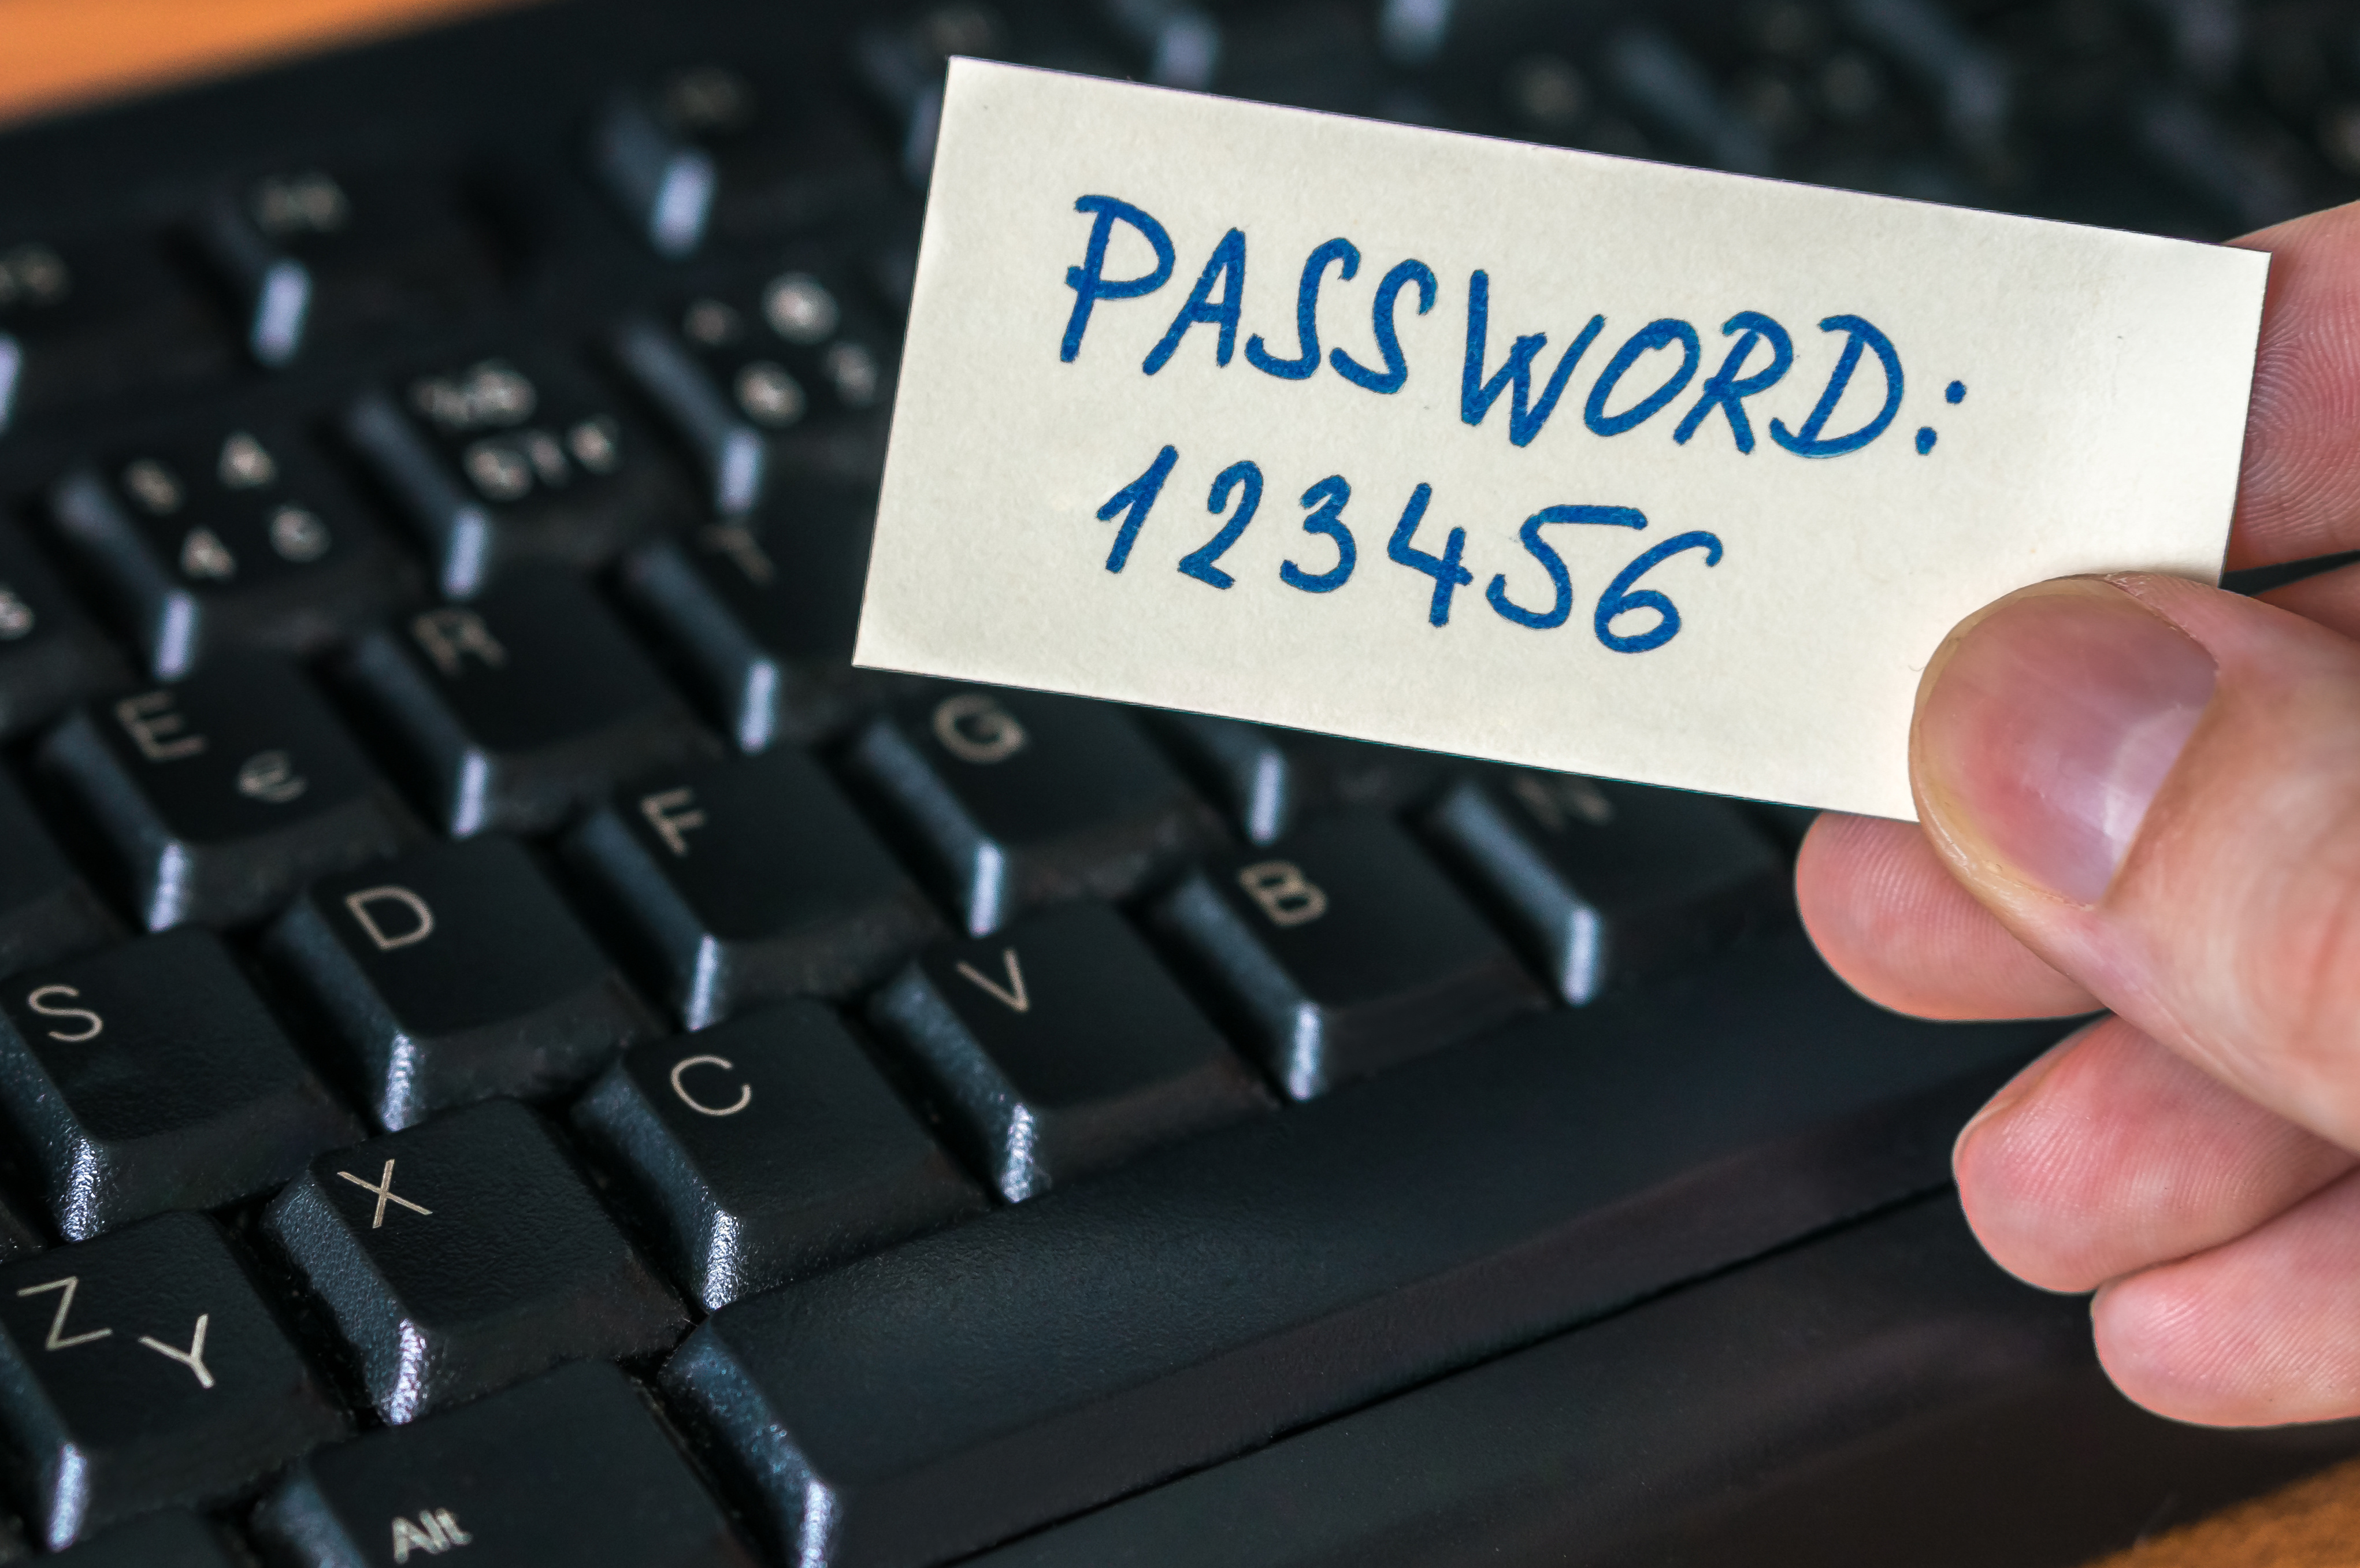 The image shows a person’s hand hovering over a computer keyboard. They are holding a piece of paper with the password 123456 written on it. 